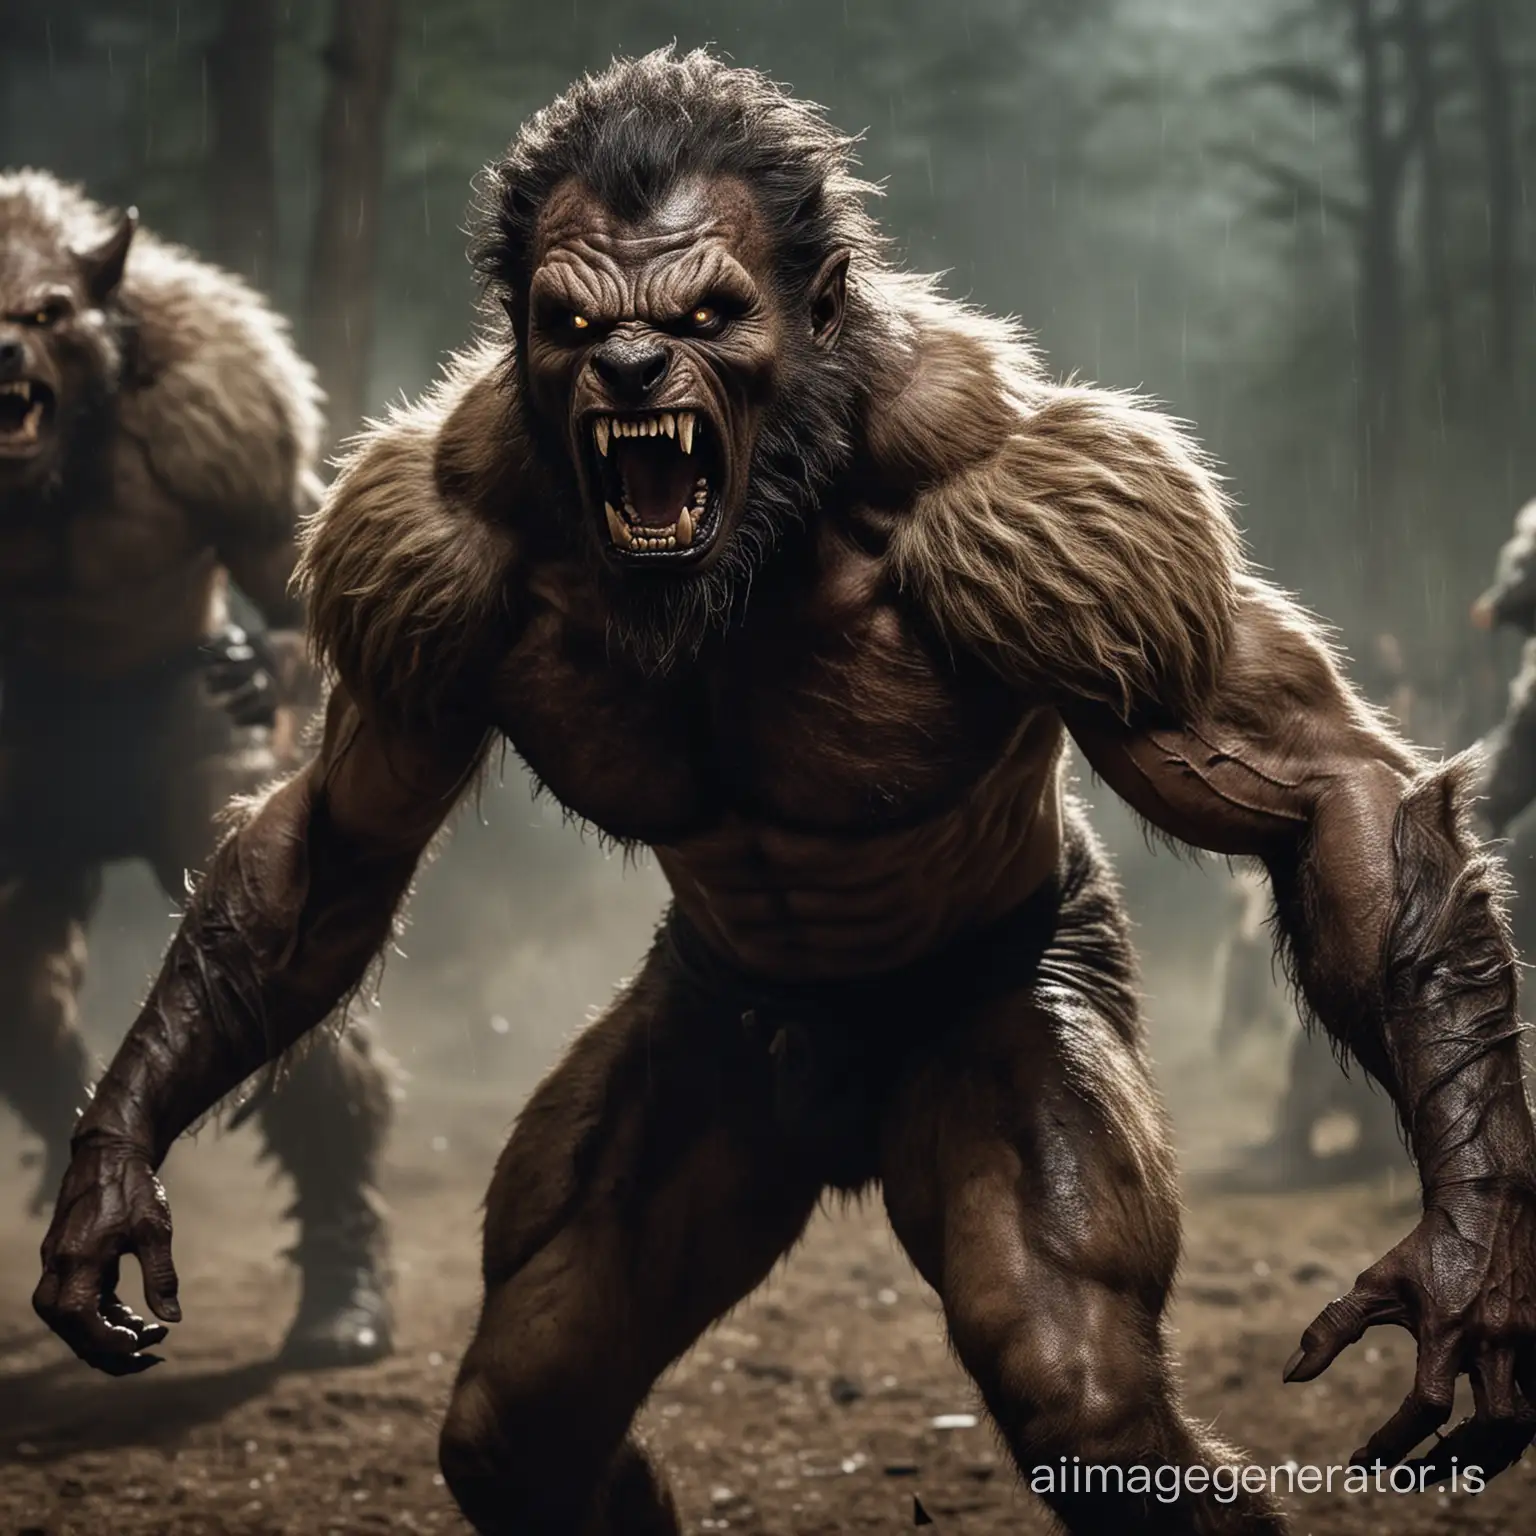 American football players 50% through transforming into werewolves after they are attacked by a werewolf